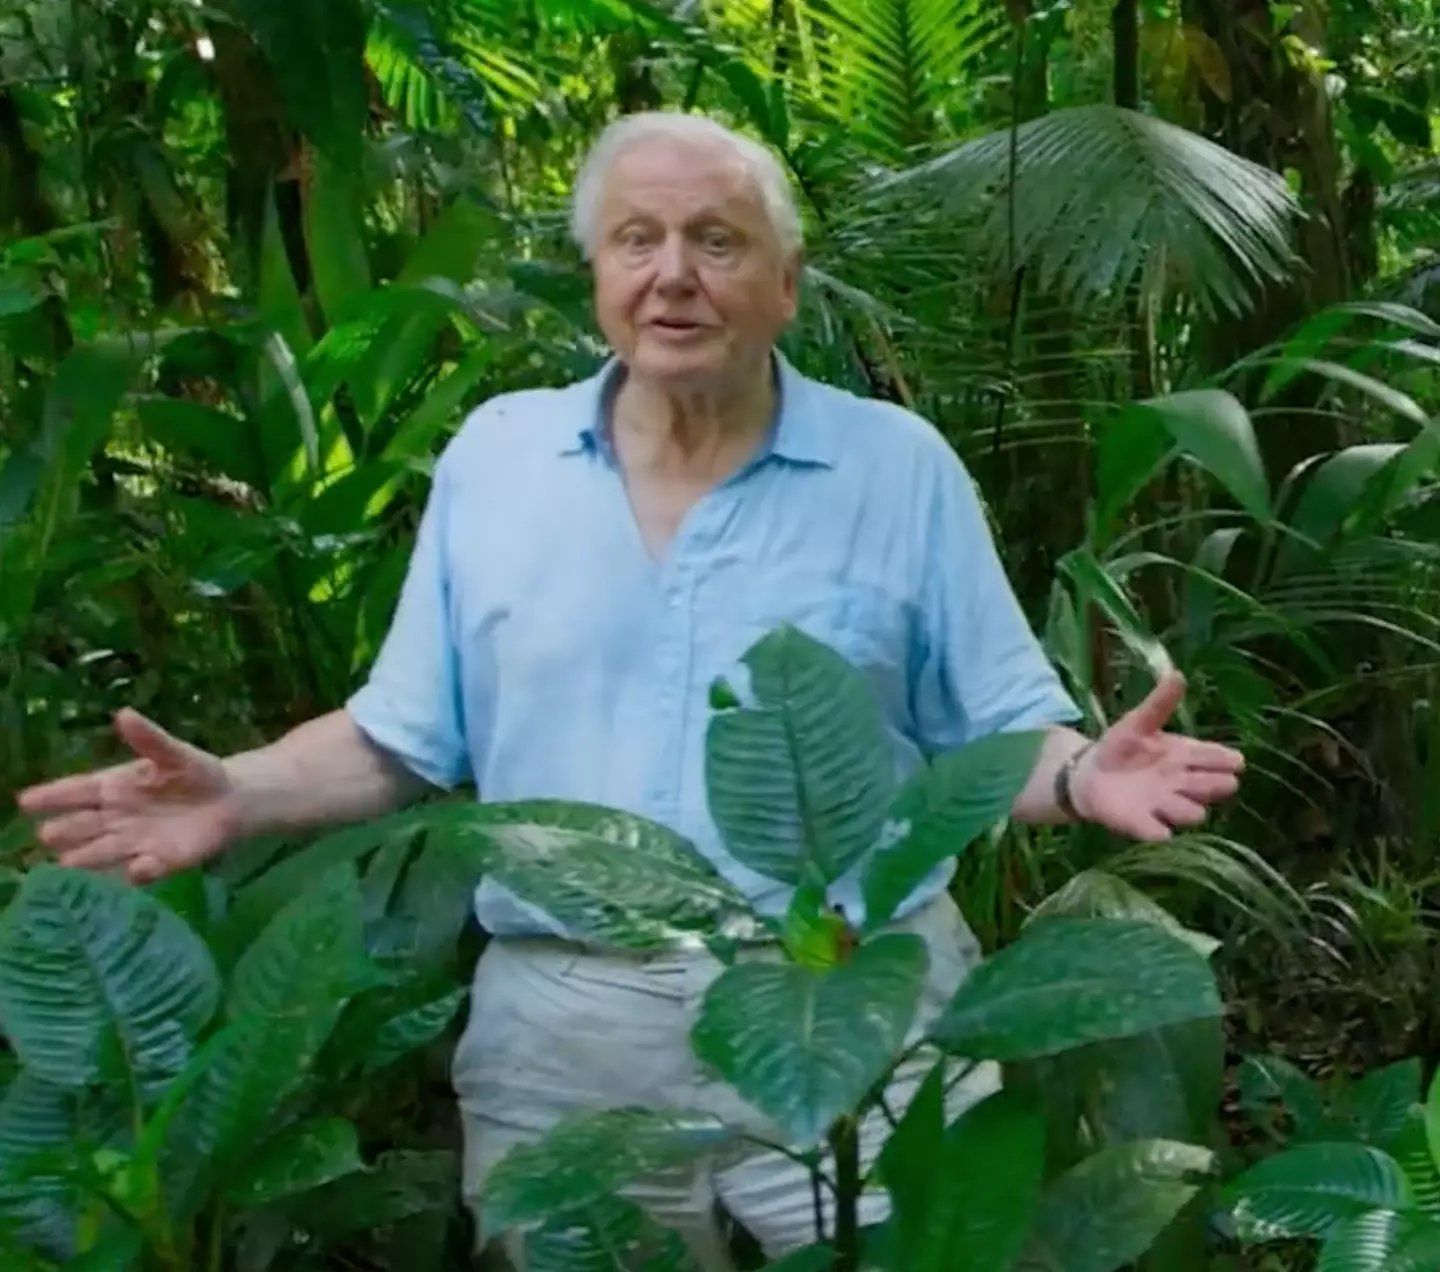 Attenborough said the world's relationship with plants has changed (